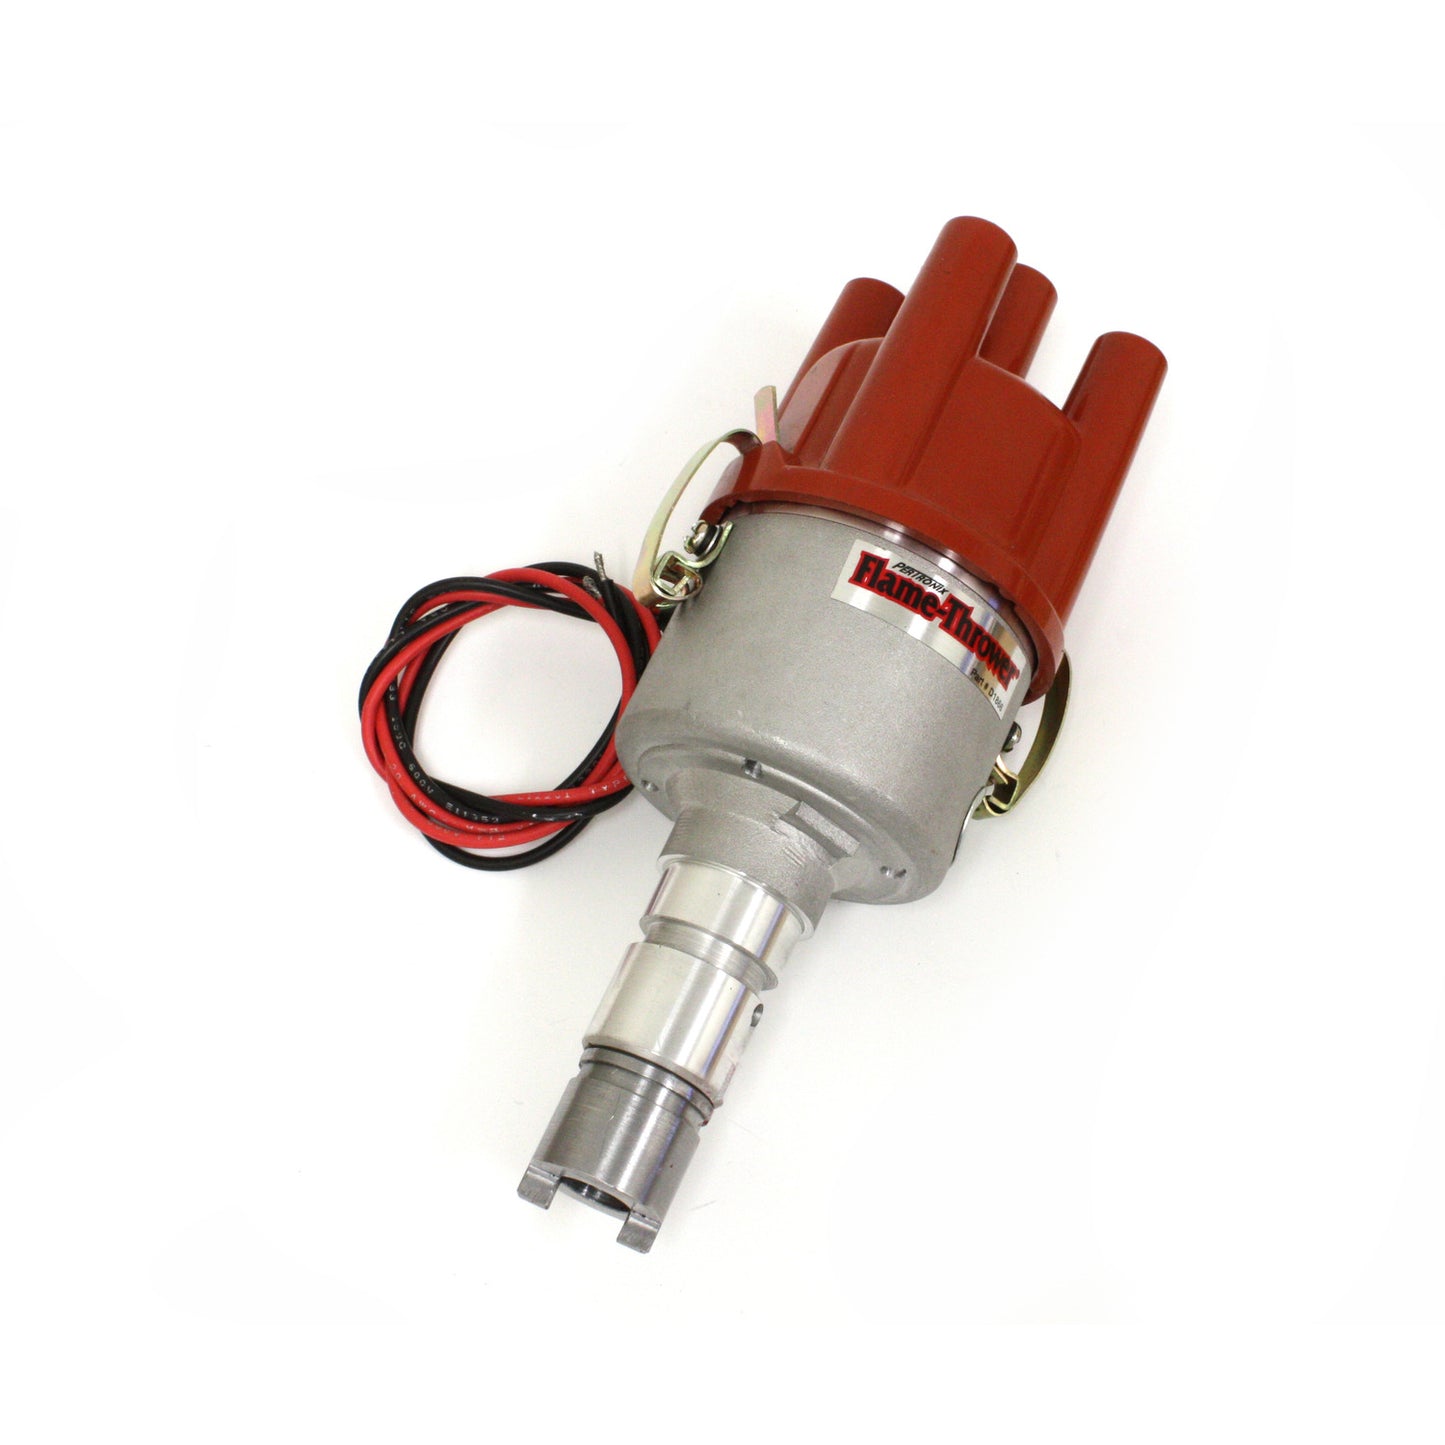 PerTronix D185604 Flame-Thrower Electronic Distributor Cast Alfa Romeo Plug and Play with Ignitor Non Vacuum